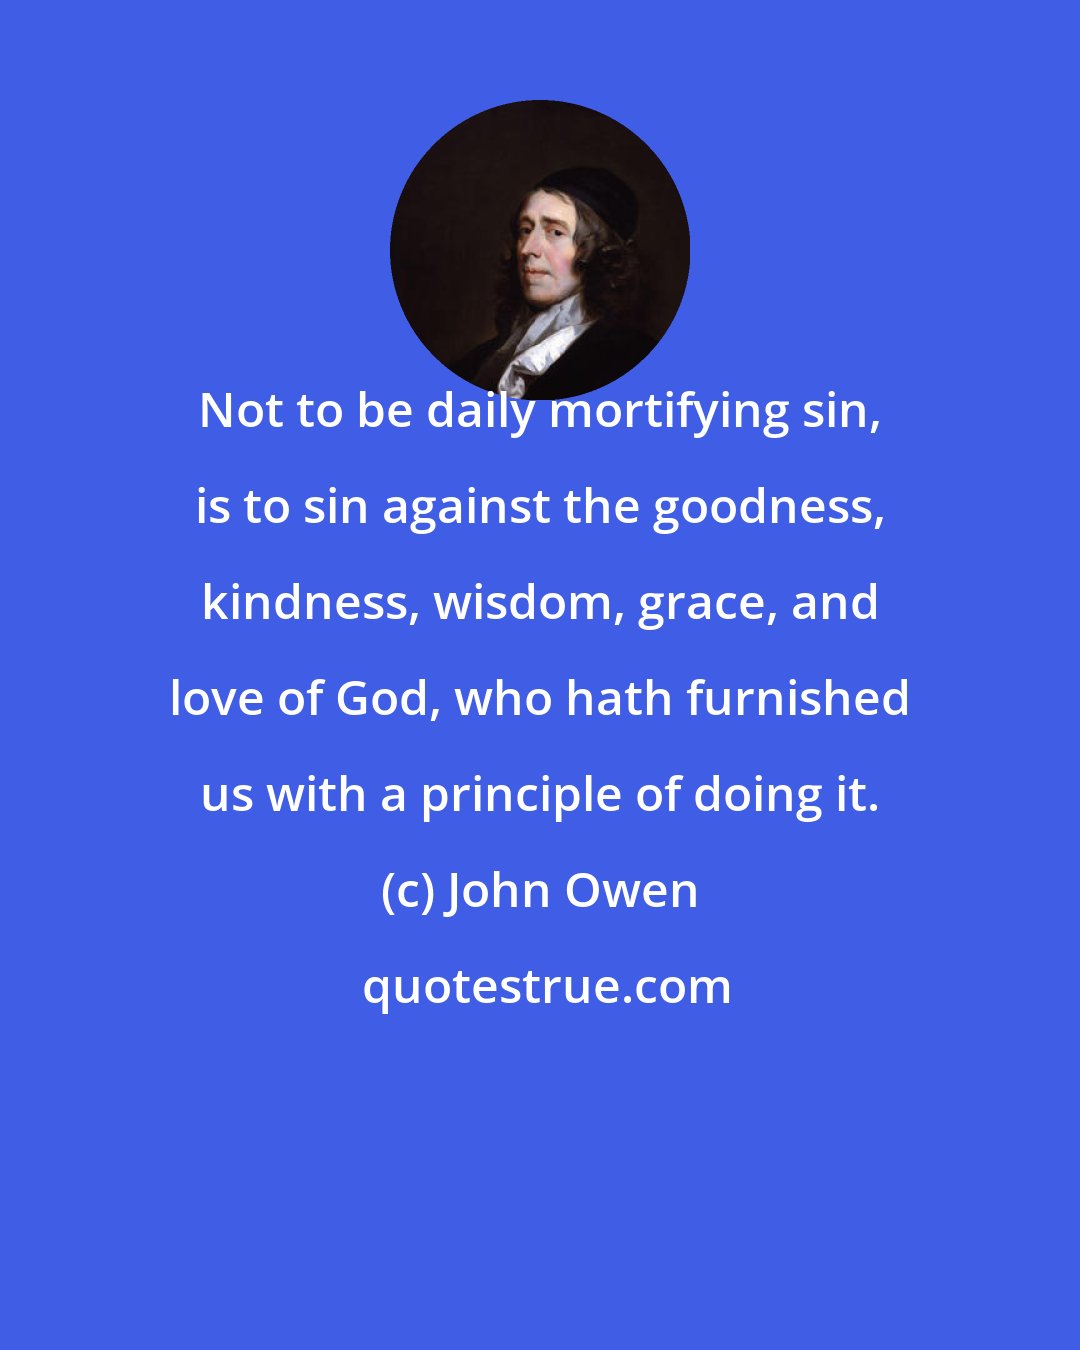 John Owen: Not to be daily mortifying sin, is to sin against the goodness, kindness, wisdom, grace, and love of God, who hath furnished us with a principle of doing it.